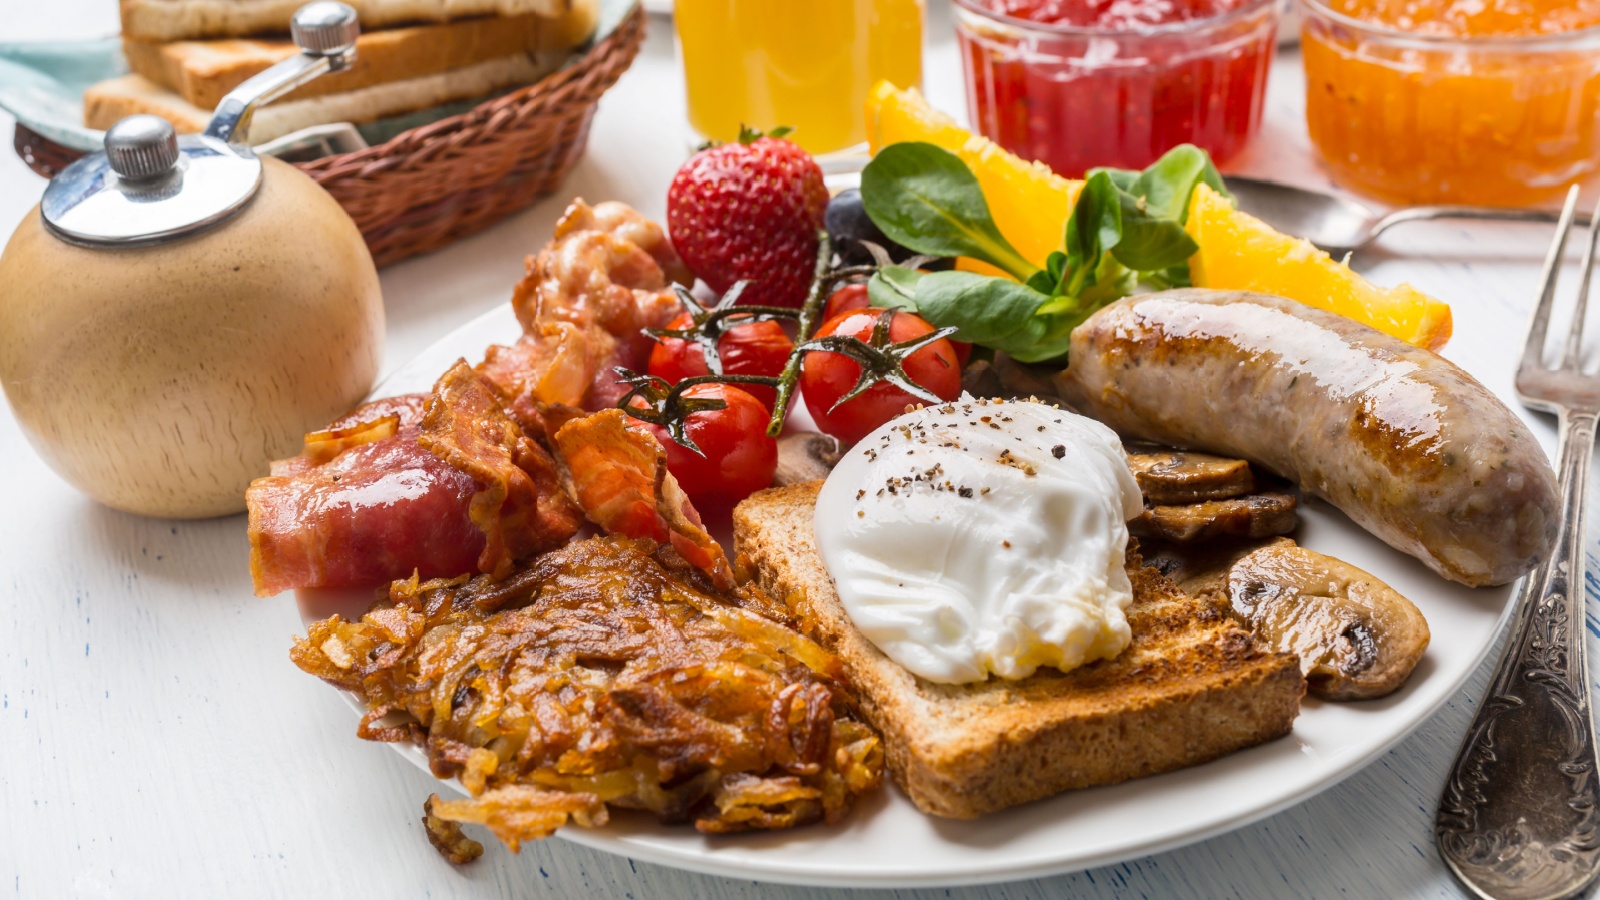 <p>While it might be tempting to pile your plate high with all the mouth-watering options, it's better to take smaller portions and make multiple trips. This helps reduce food waste and ensures there's enough for everyone.</p>